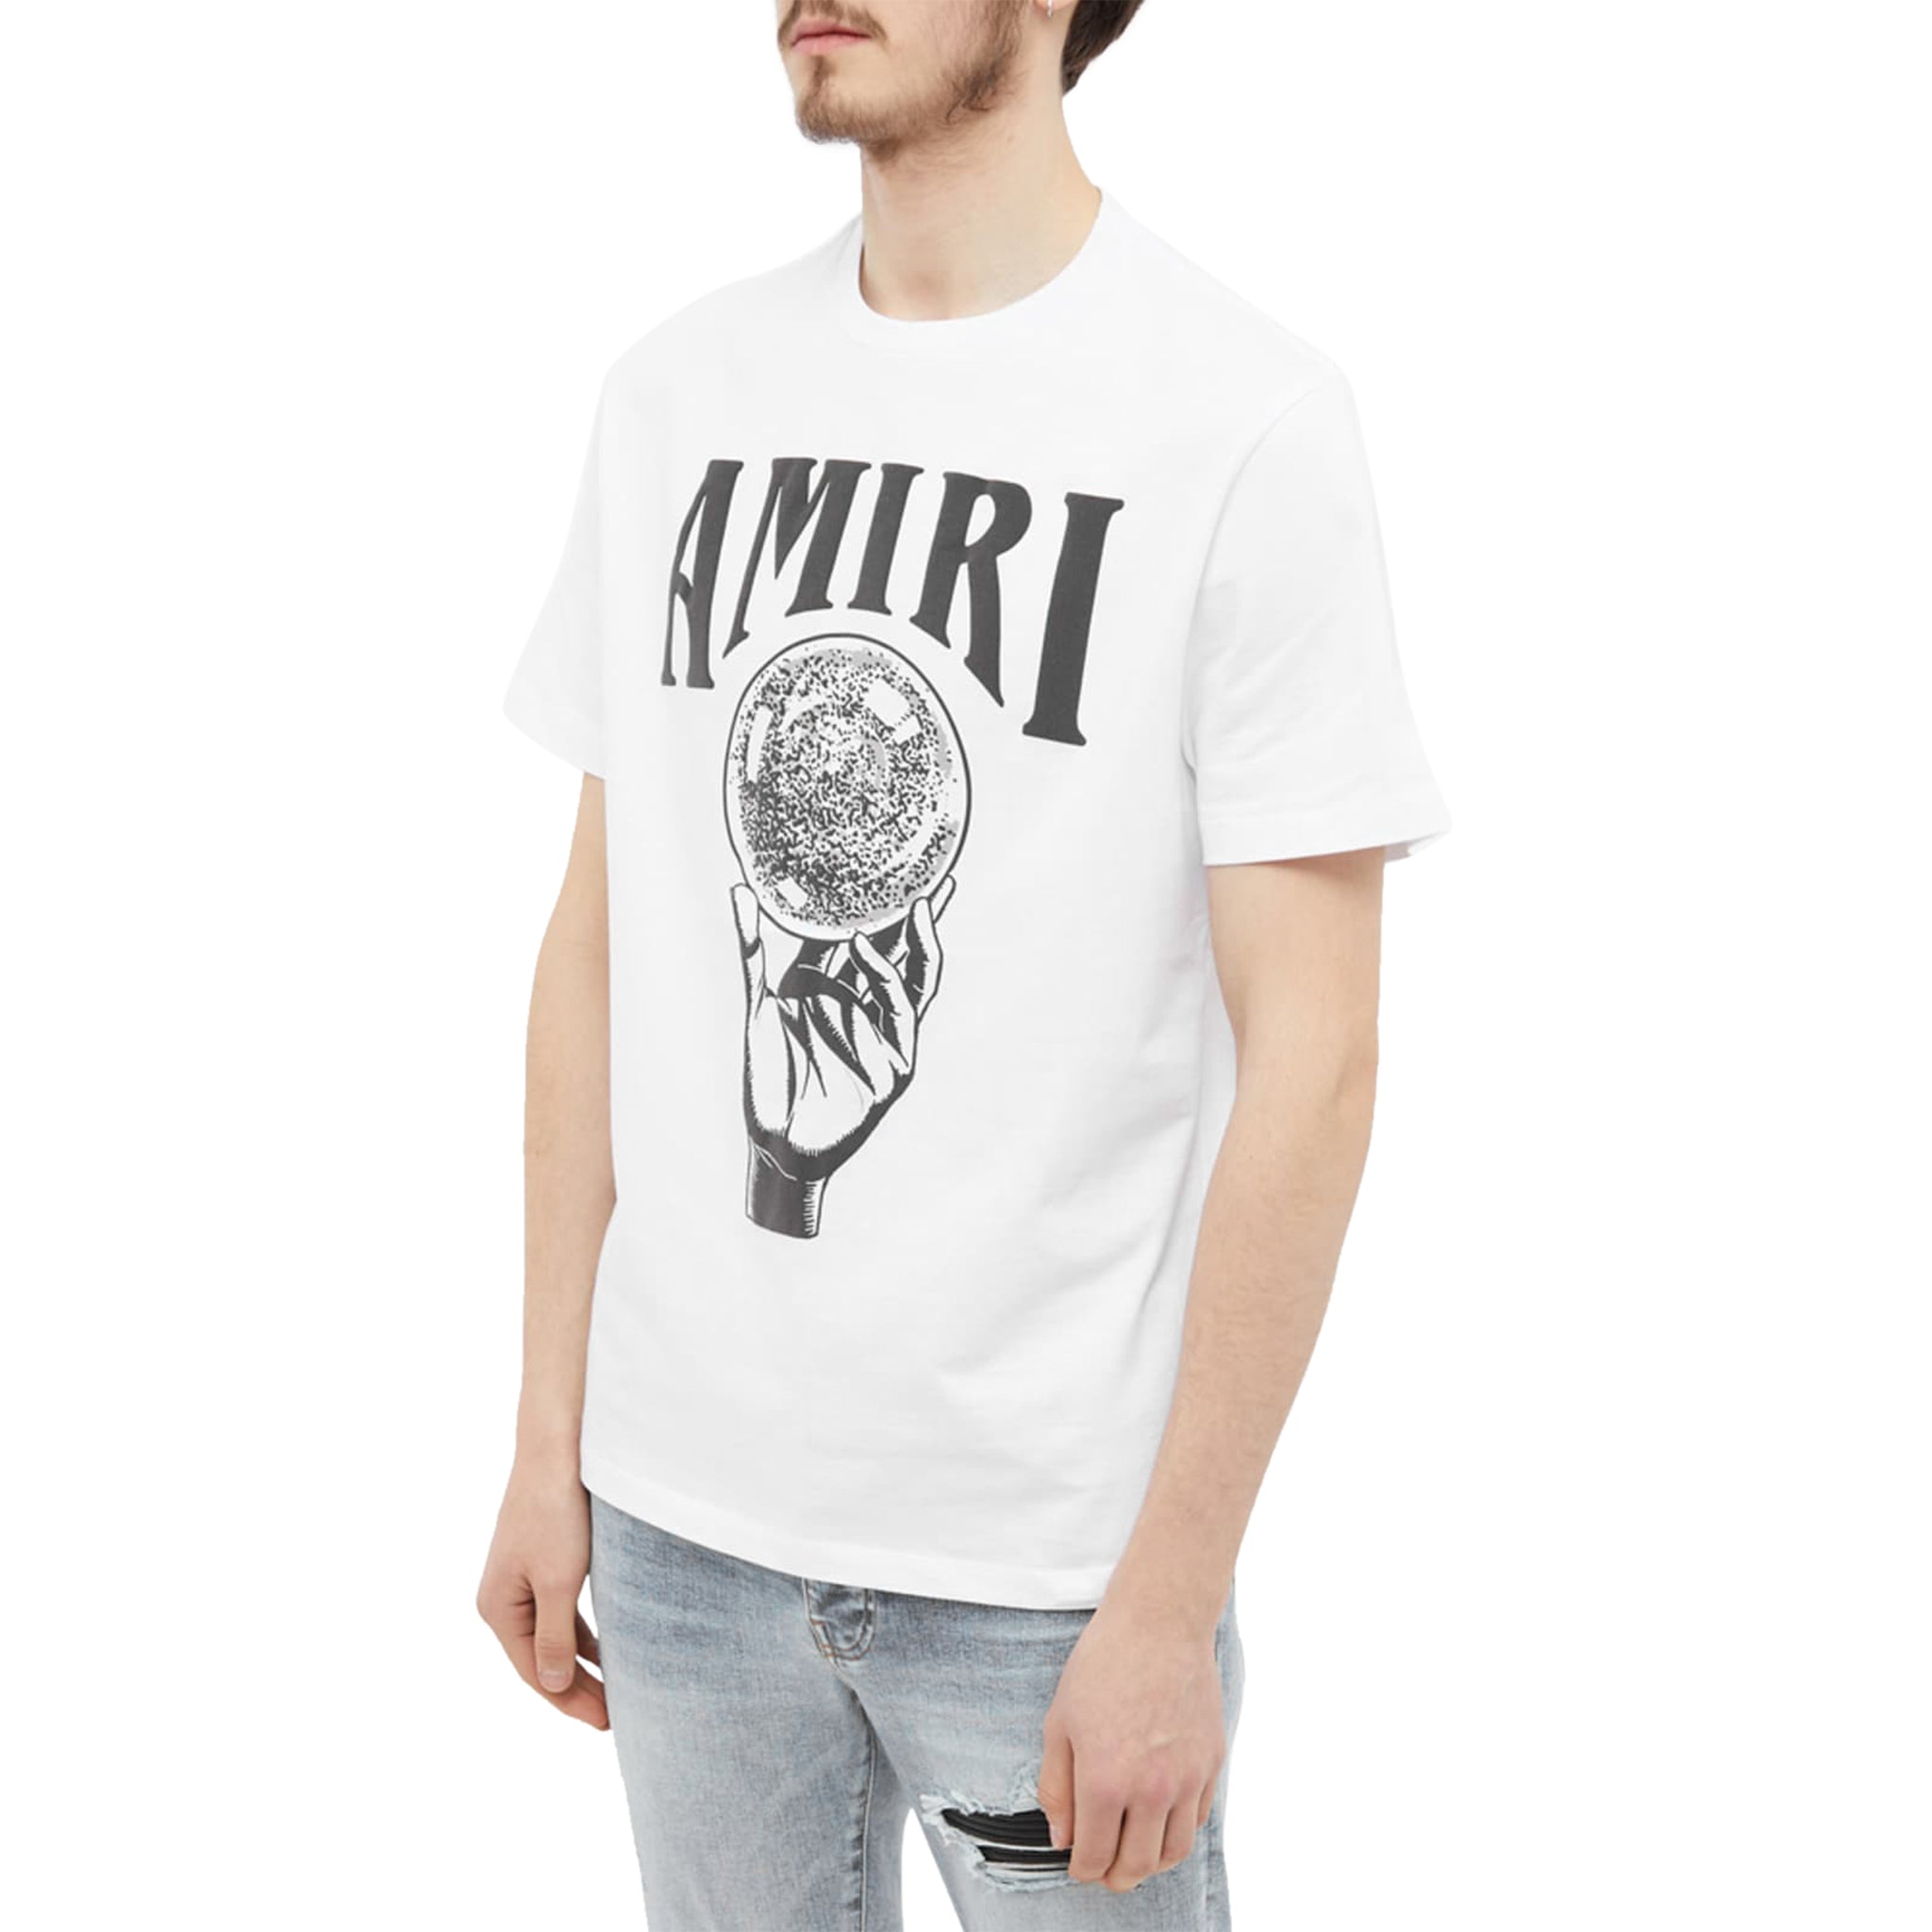 Front Model view of Amiri Crystal Ball T Shirt White PS23MJG007-100